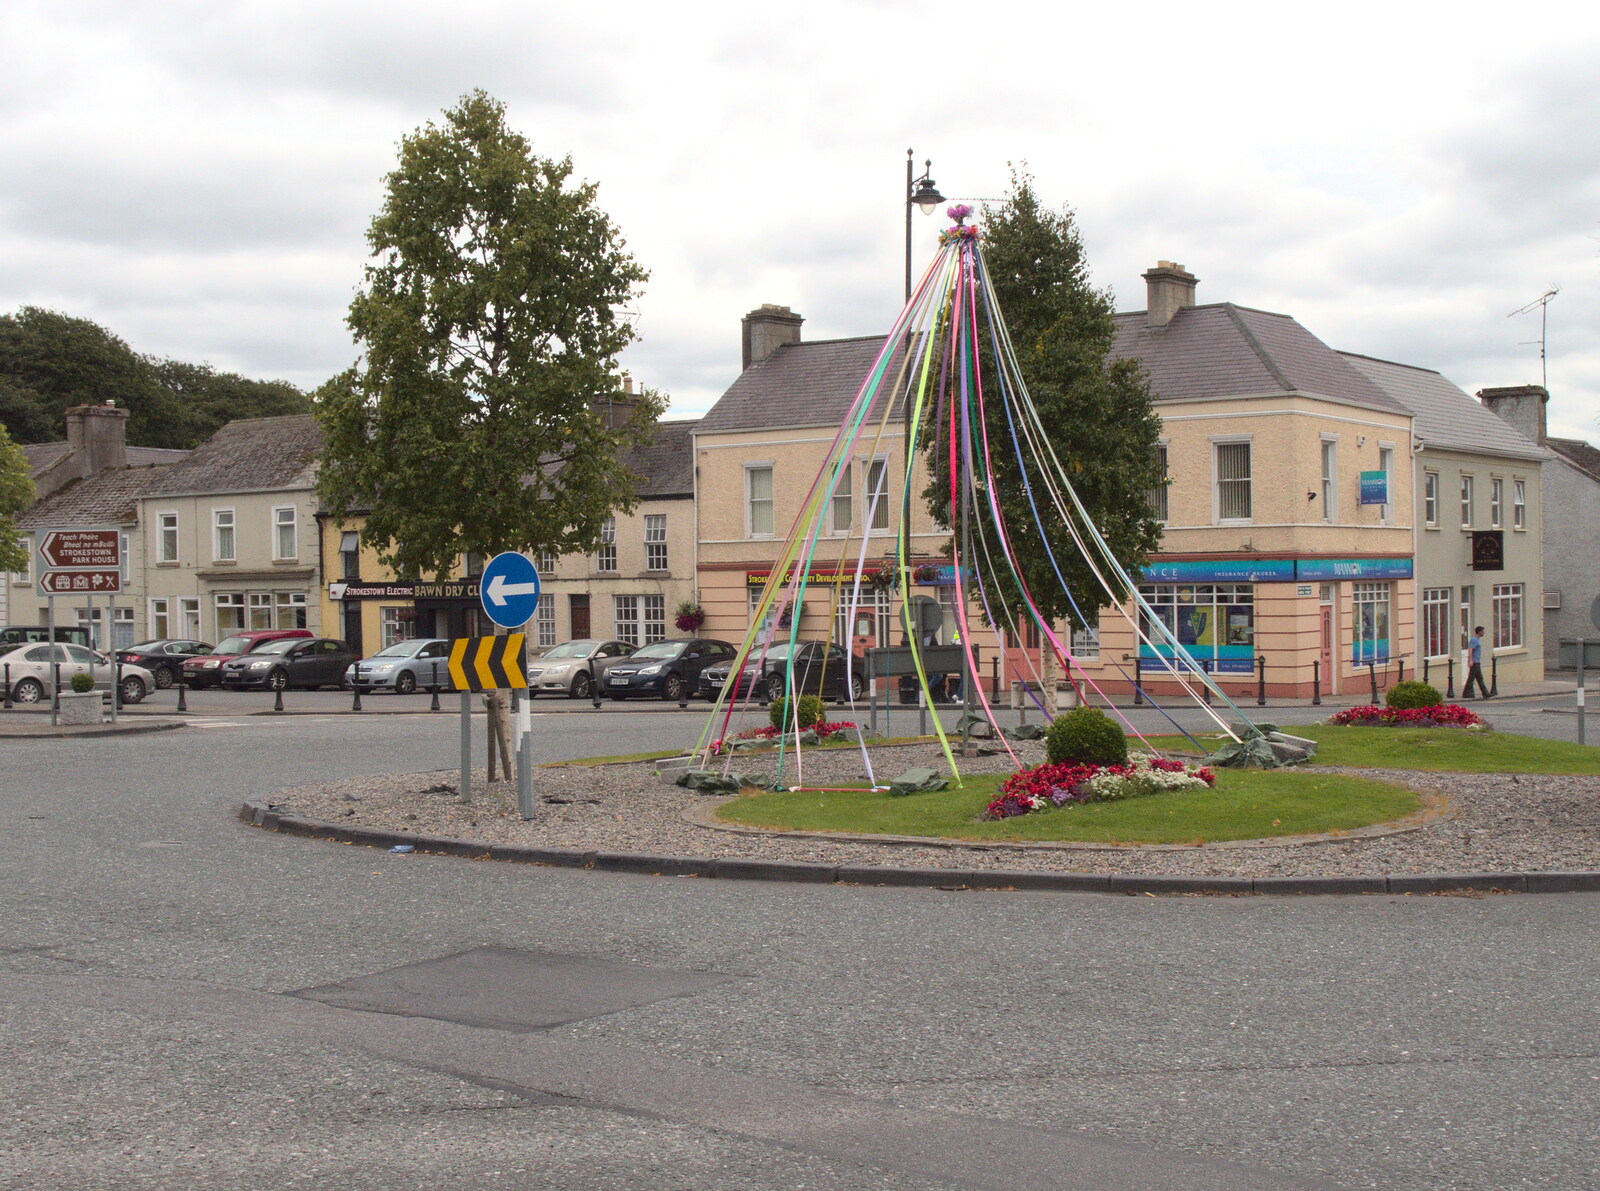 Ribbons on a roundabout Maypole from From Achill to Strokestown, Mayo and Roscommon, Ireland - 10th August 2017